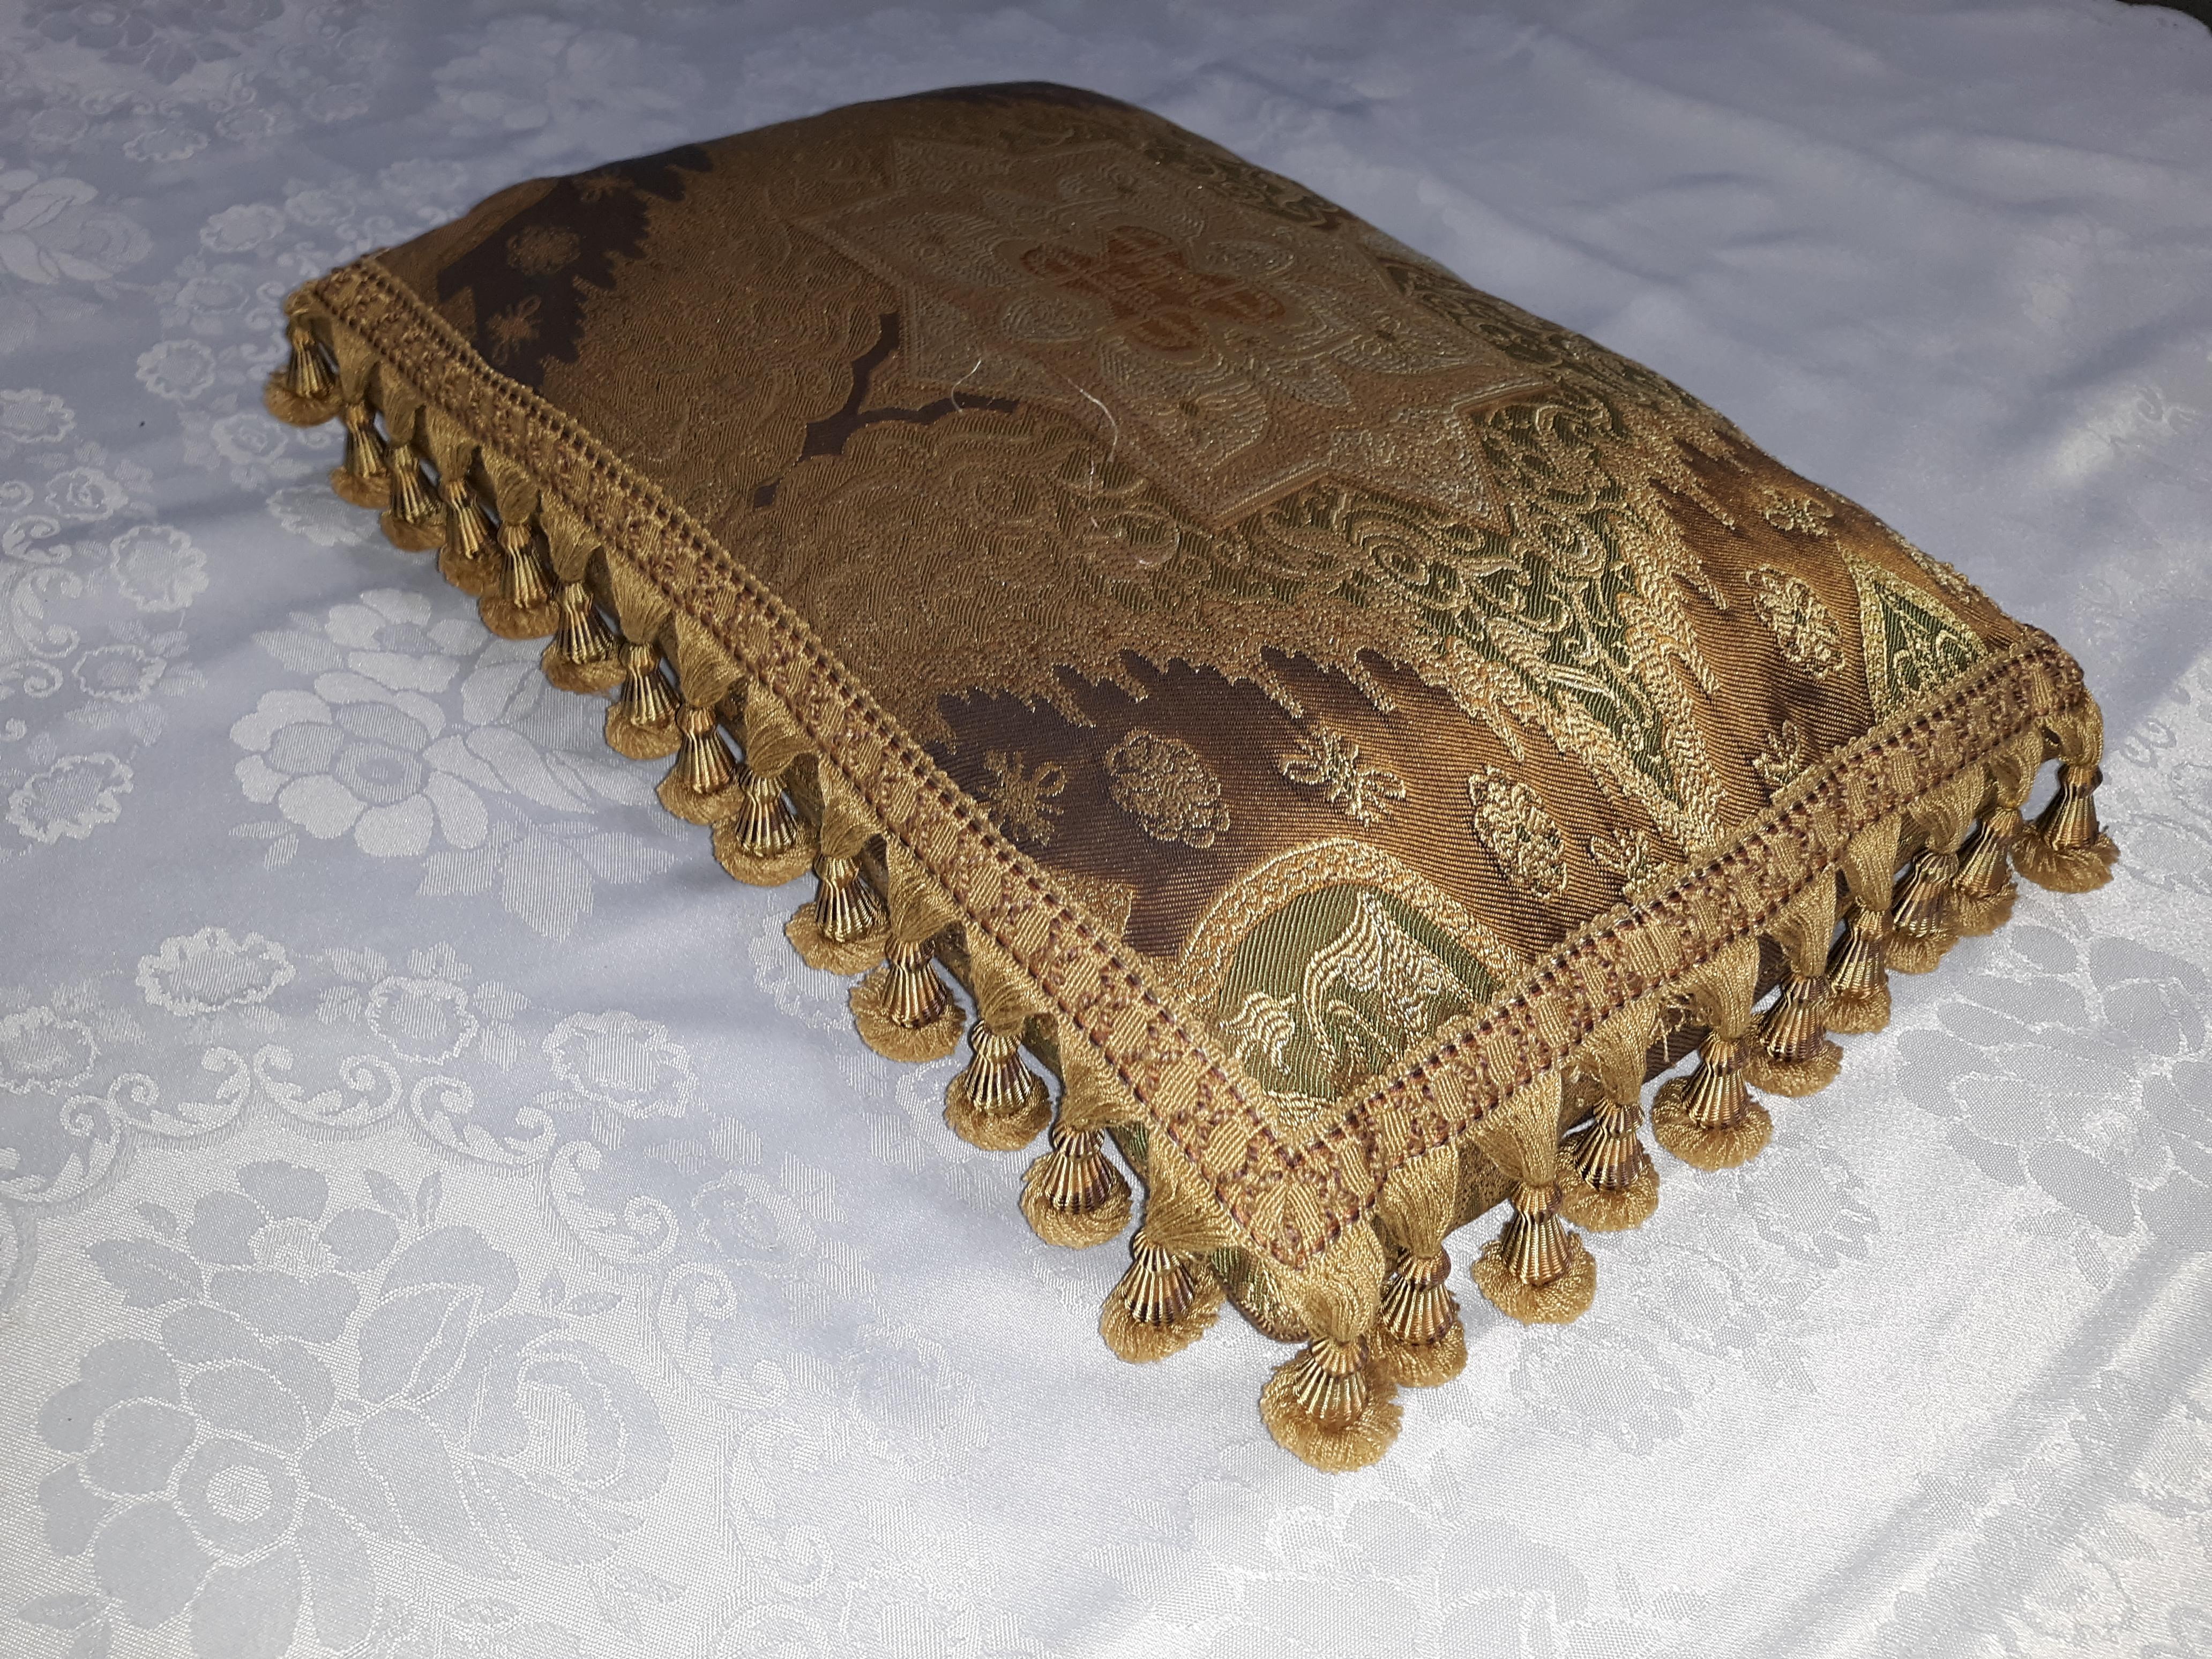 Amazing deal Antique embroidered cushion set. These are absolutely beautiful, and rare to find. They will make the couch, bed, or sofa on which they are placed.

